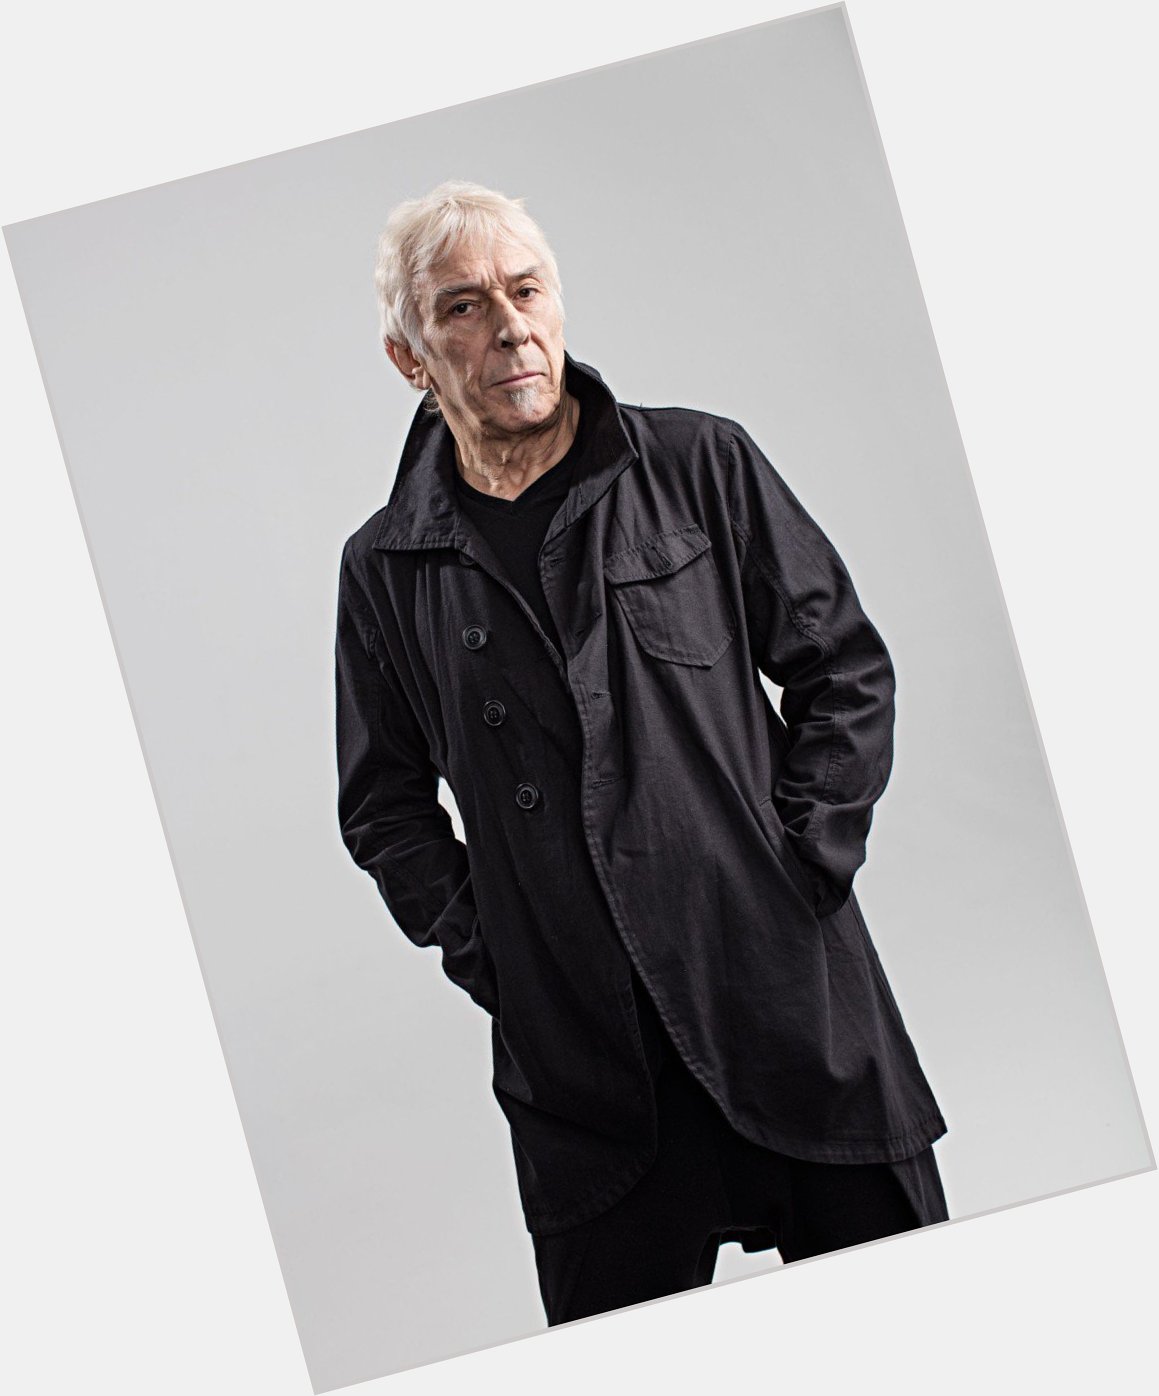 Happy Birthday to John Cale, born this day in 1942! 